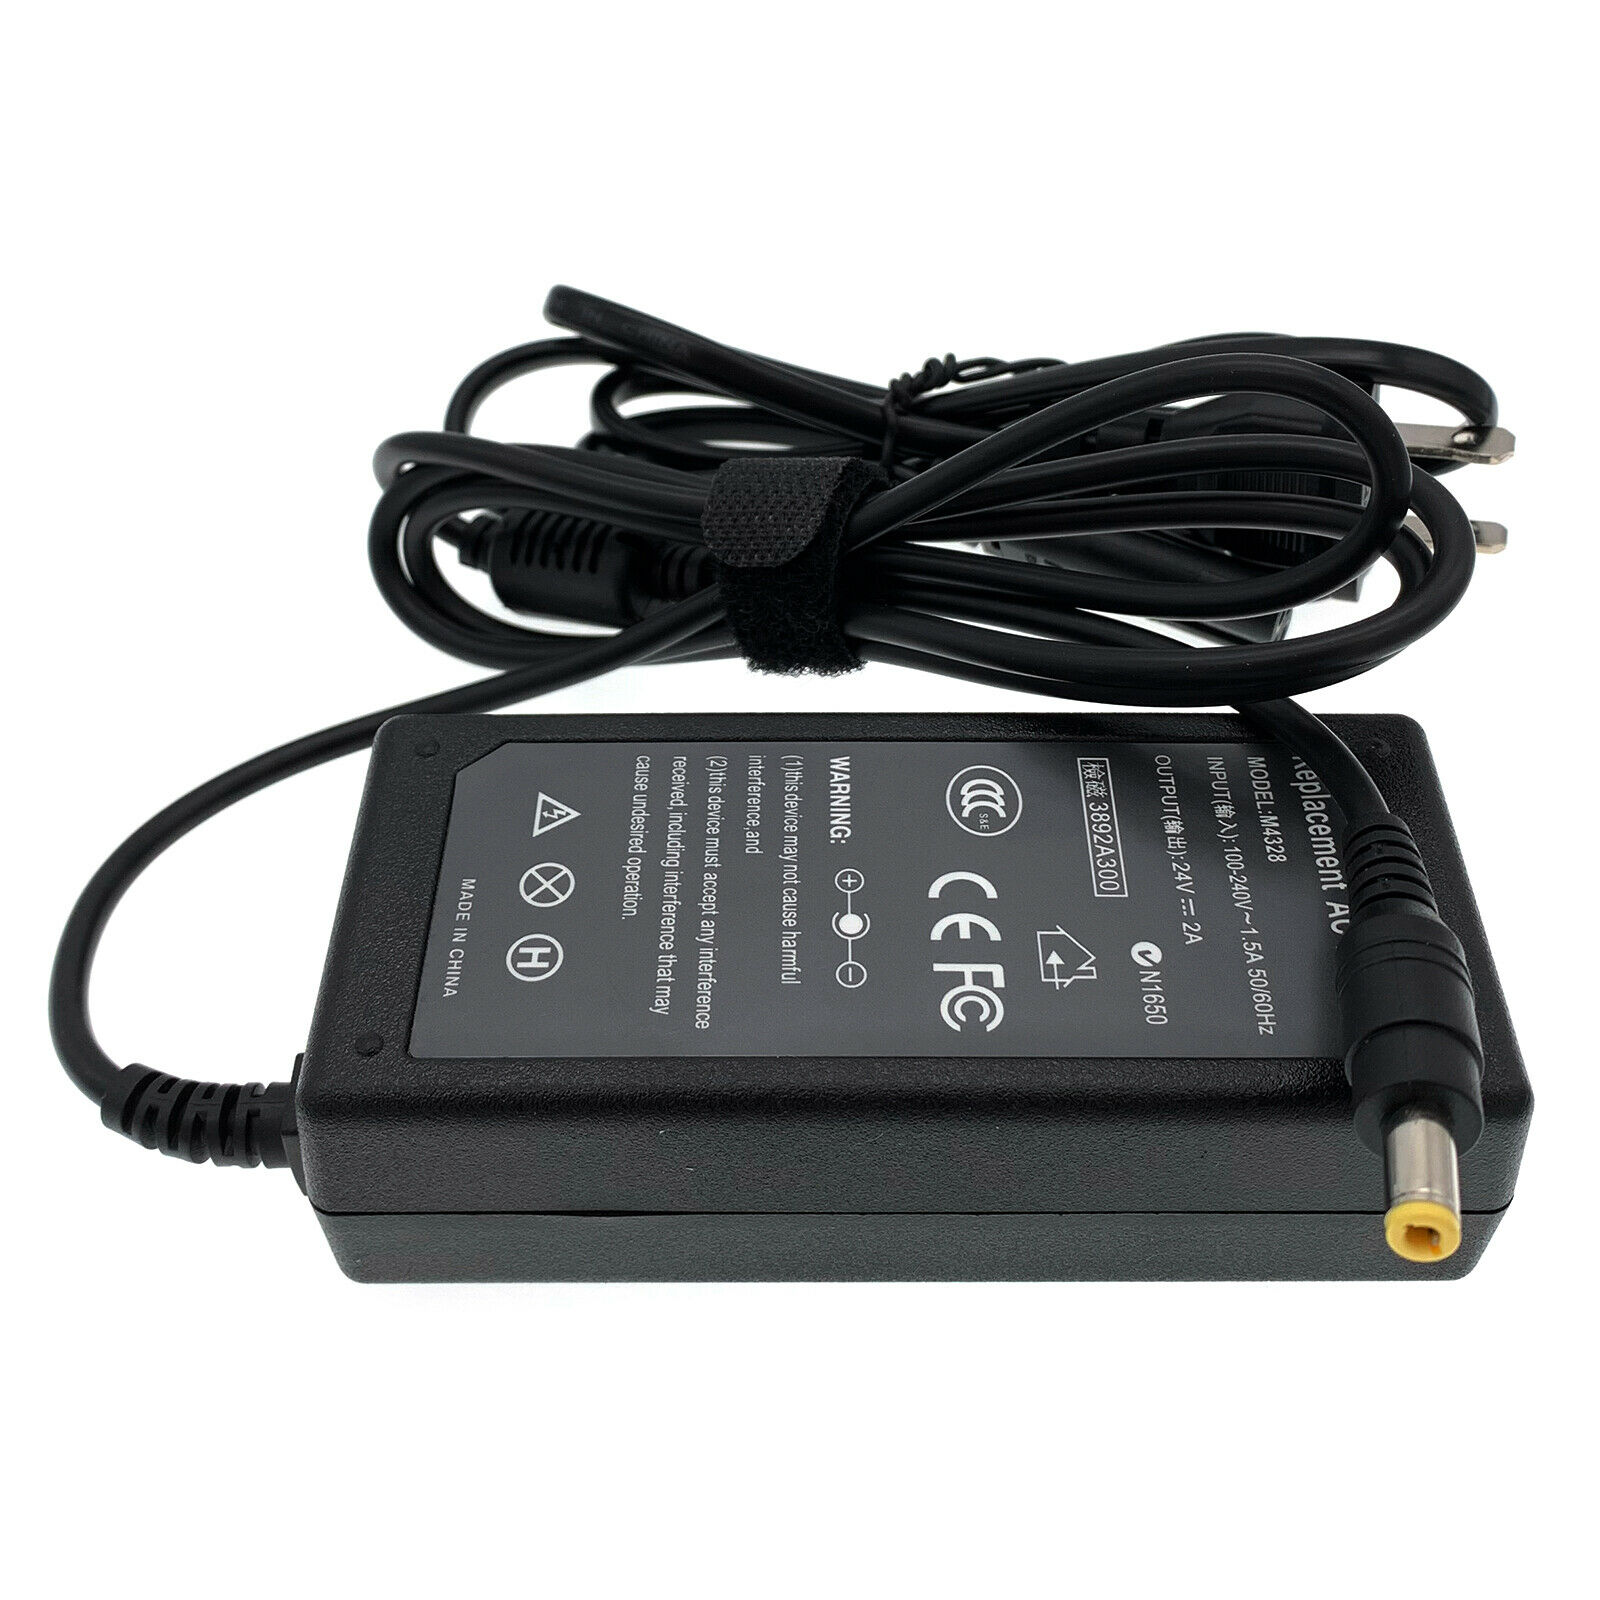 24V 2A AC DC Adapter Power Supply Cord Charger For LCD Monitor Printer 5.5mm Tip 